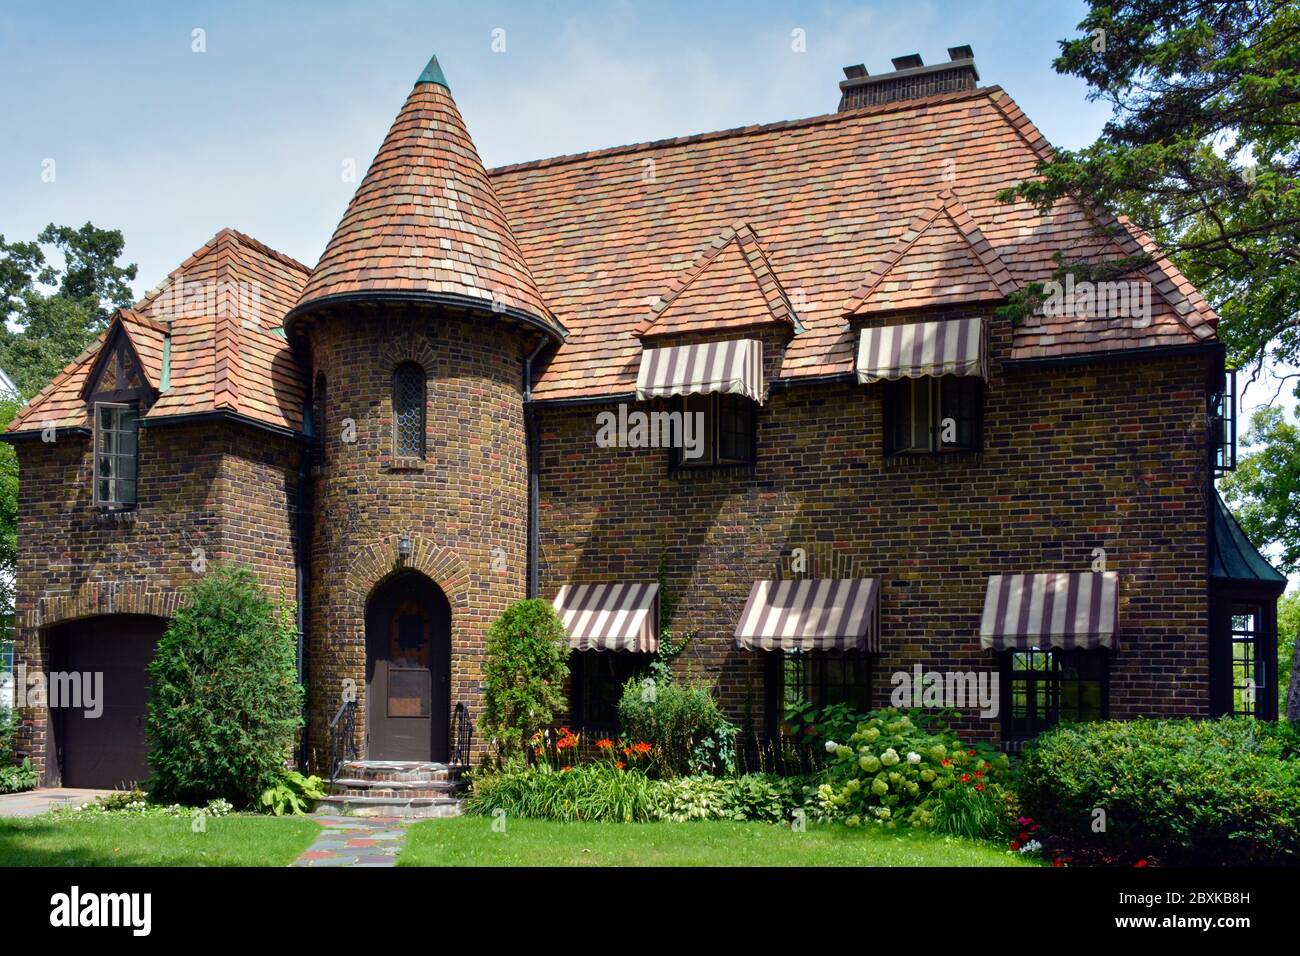 A stunning brick residence with French Norman and Tudor elements with turret and awnings, in the historic Southside neighborhood of St. Cloud, MN, USA Stock Photo